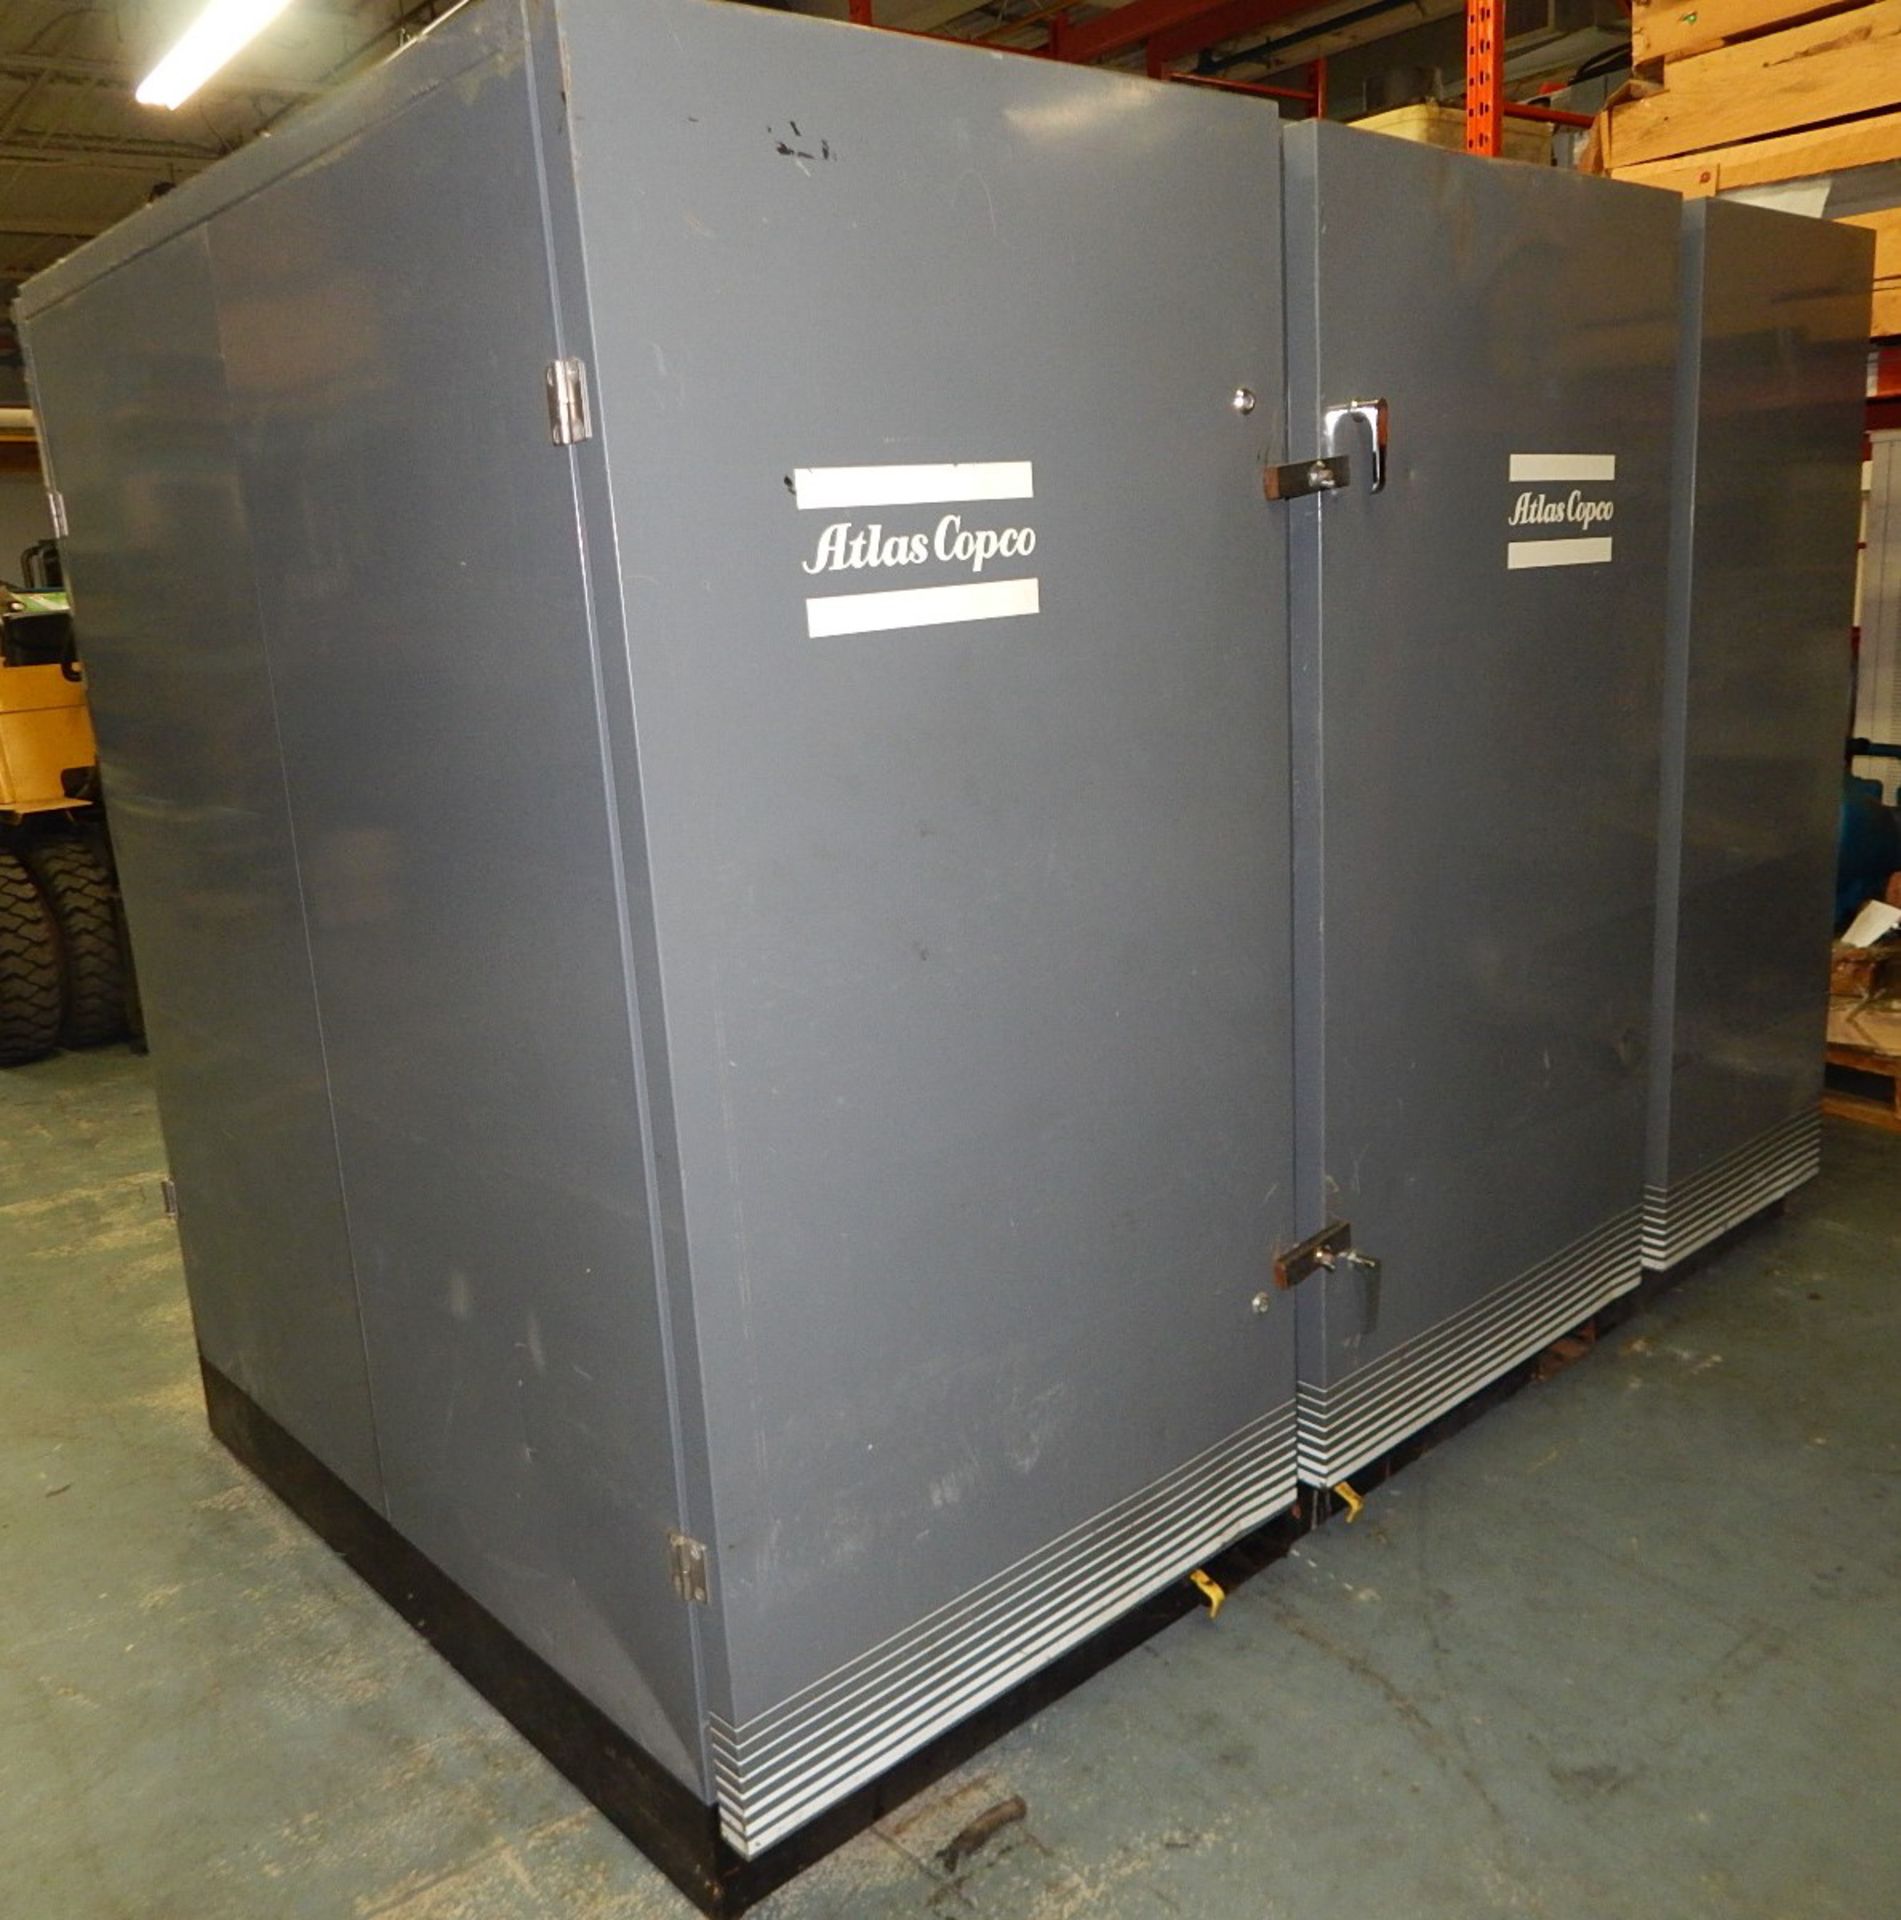 ATLAS COPCO GA160 ROTARY SCREW AIR COMPRESSORS WITH 200 HP, 157 PSI, S/N: AIF.018745 (CI) [RIGGING - Image 3 of 7